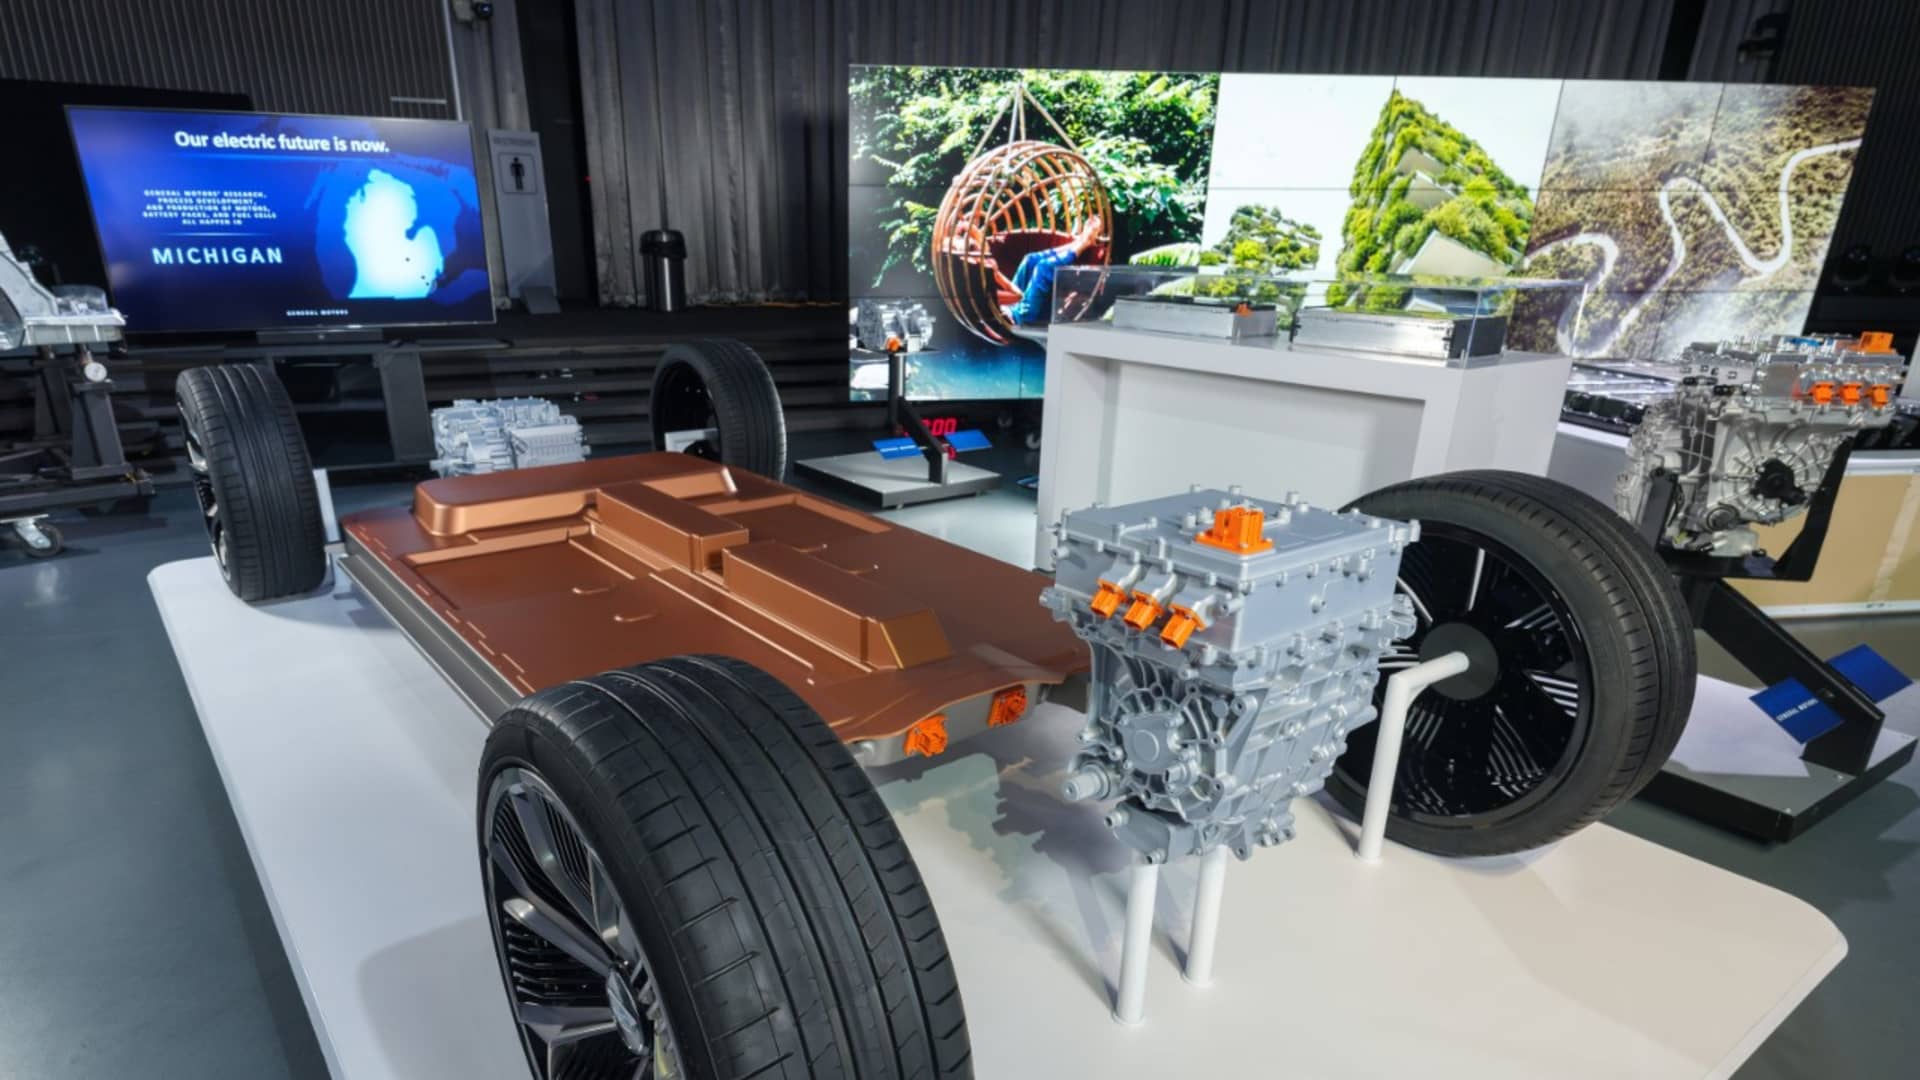 General Motors revealed its all-new modular platform and battery system, Ultium, on March 4, 2020 at its Tech Center campus in Warren, Michigan.